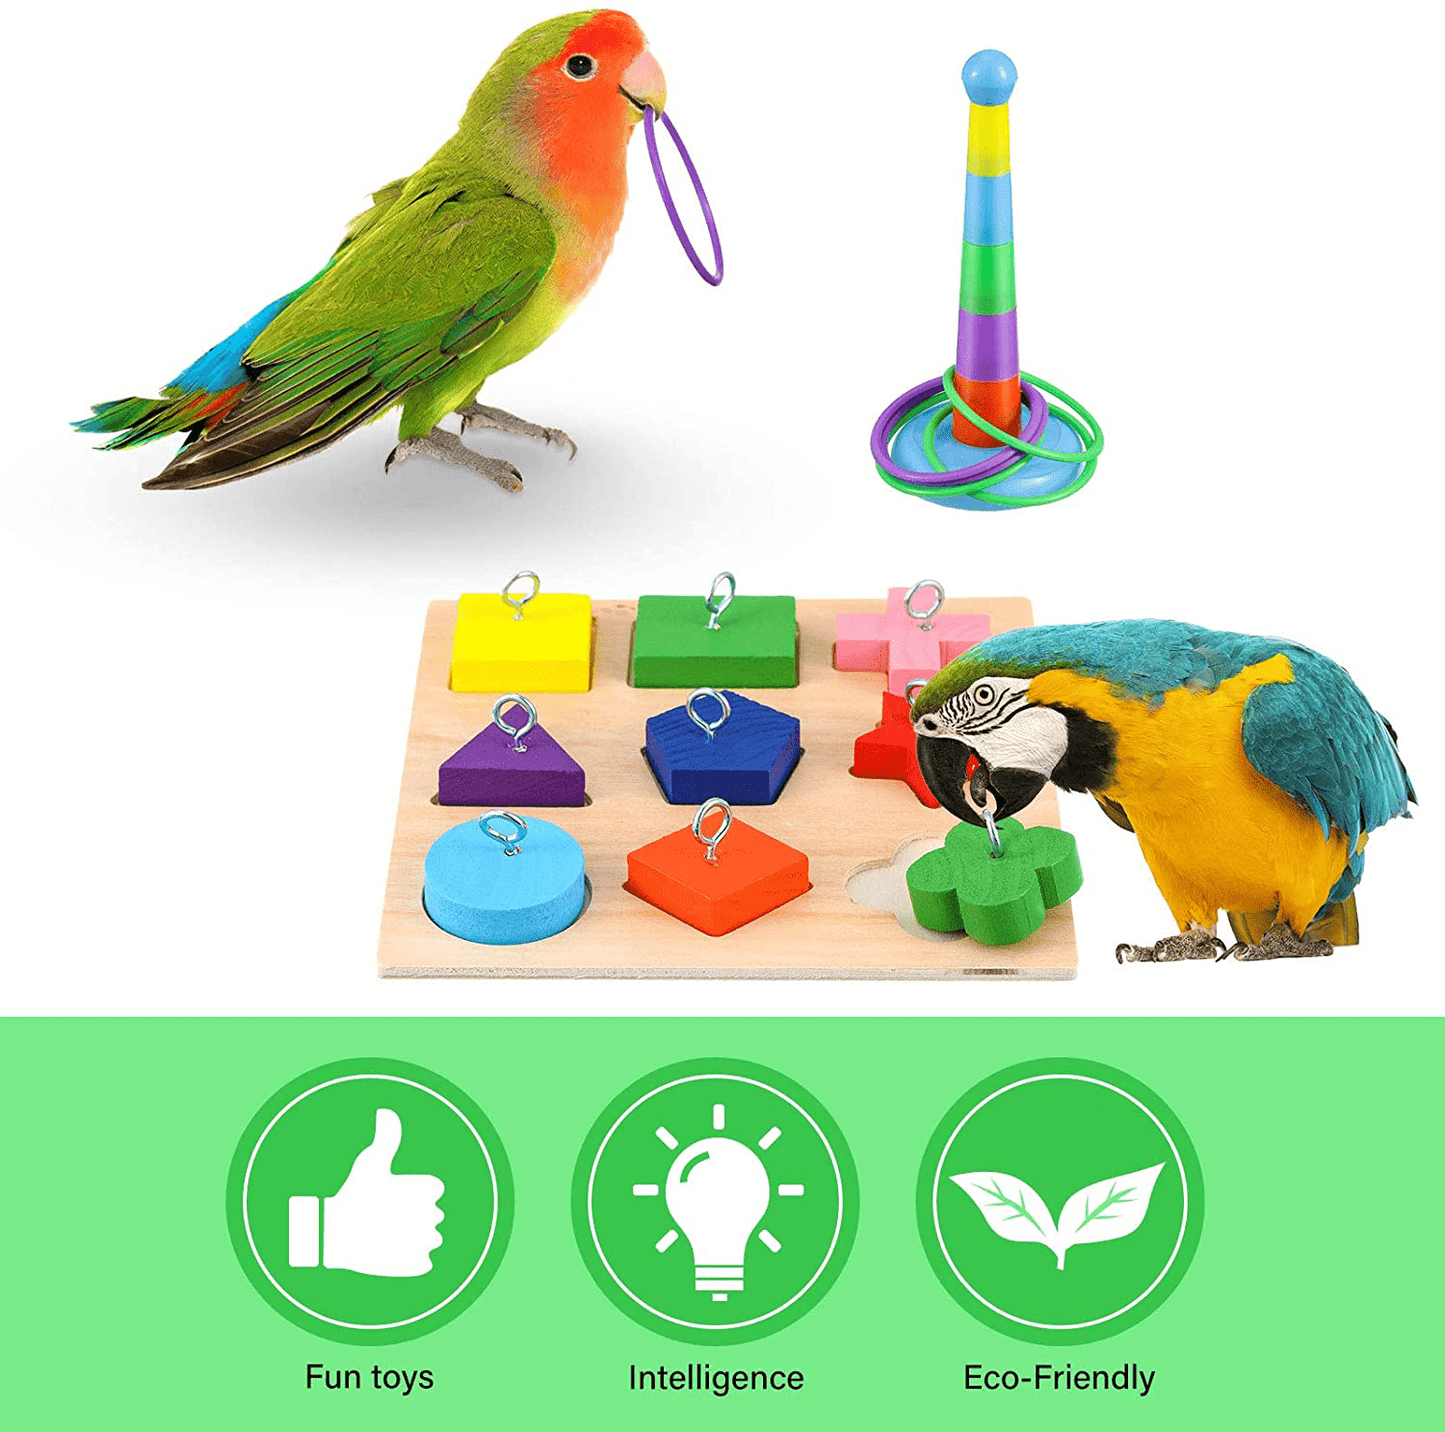 6 Pieces Bird Training Toys Parrot Intelligence Toy Parrot Wooden Block Puzzles Toy Stacking Rings Toy Mini Parrot Skateboard Nuts and Bolts Bird Toy Bell Balls for Budgie Parakeet Cockatiel Macaw